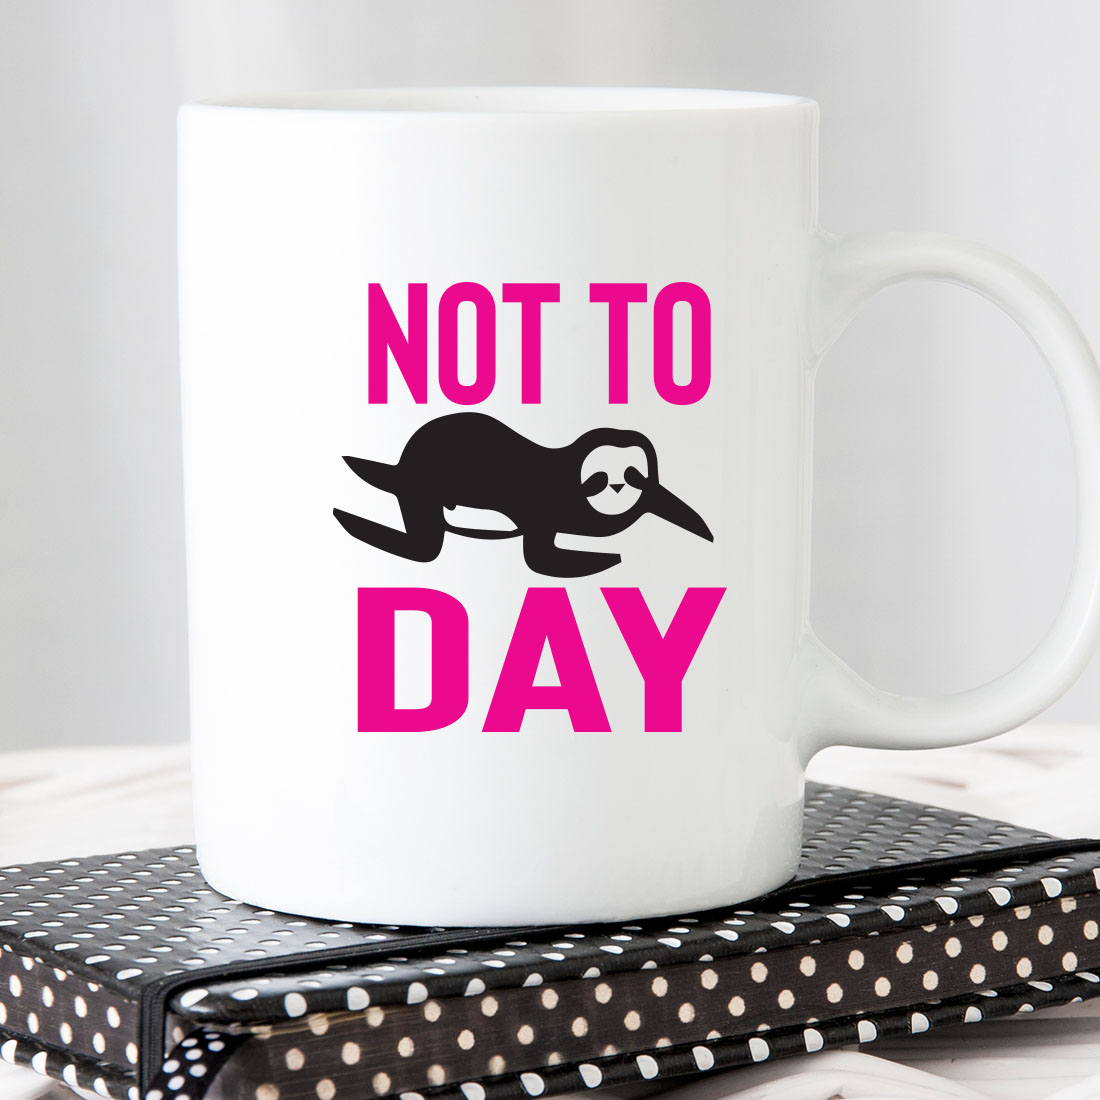 Coffee mug that says not to day on it.